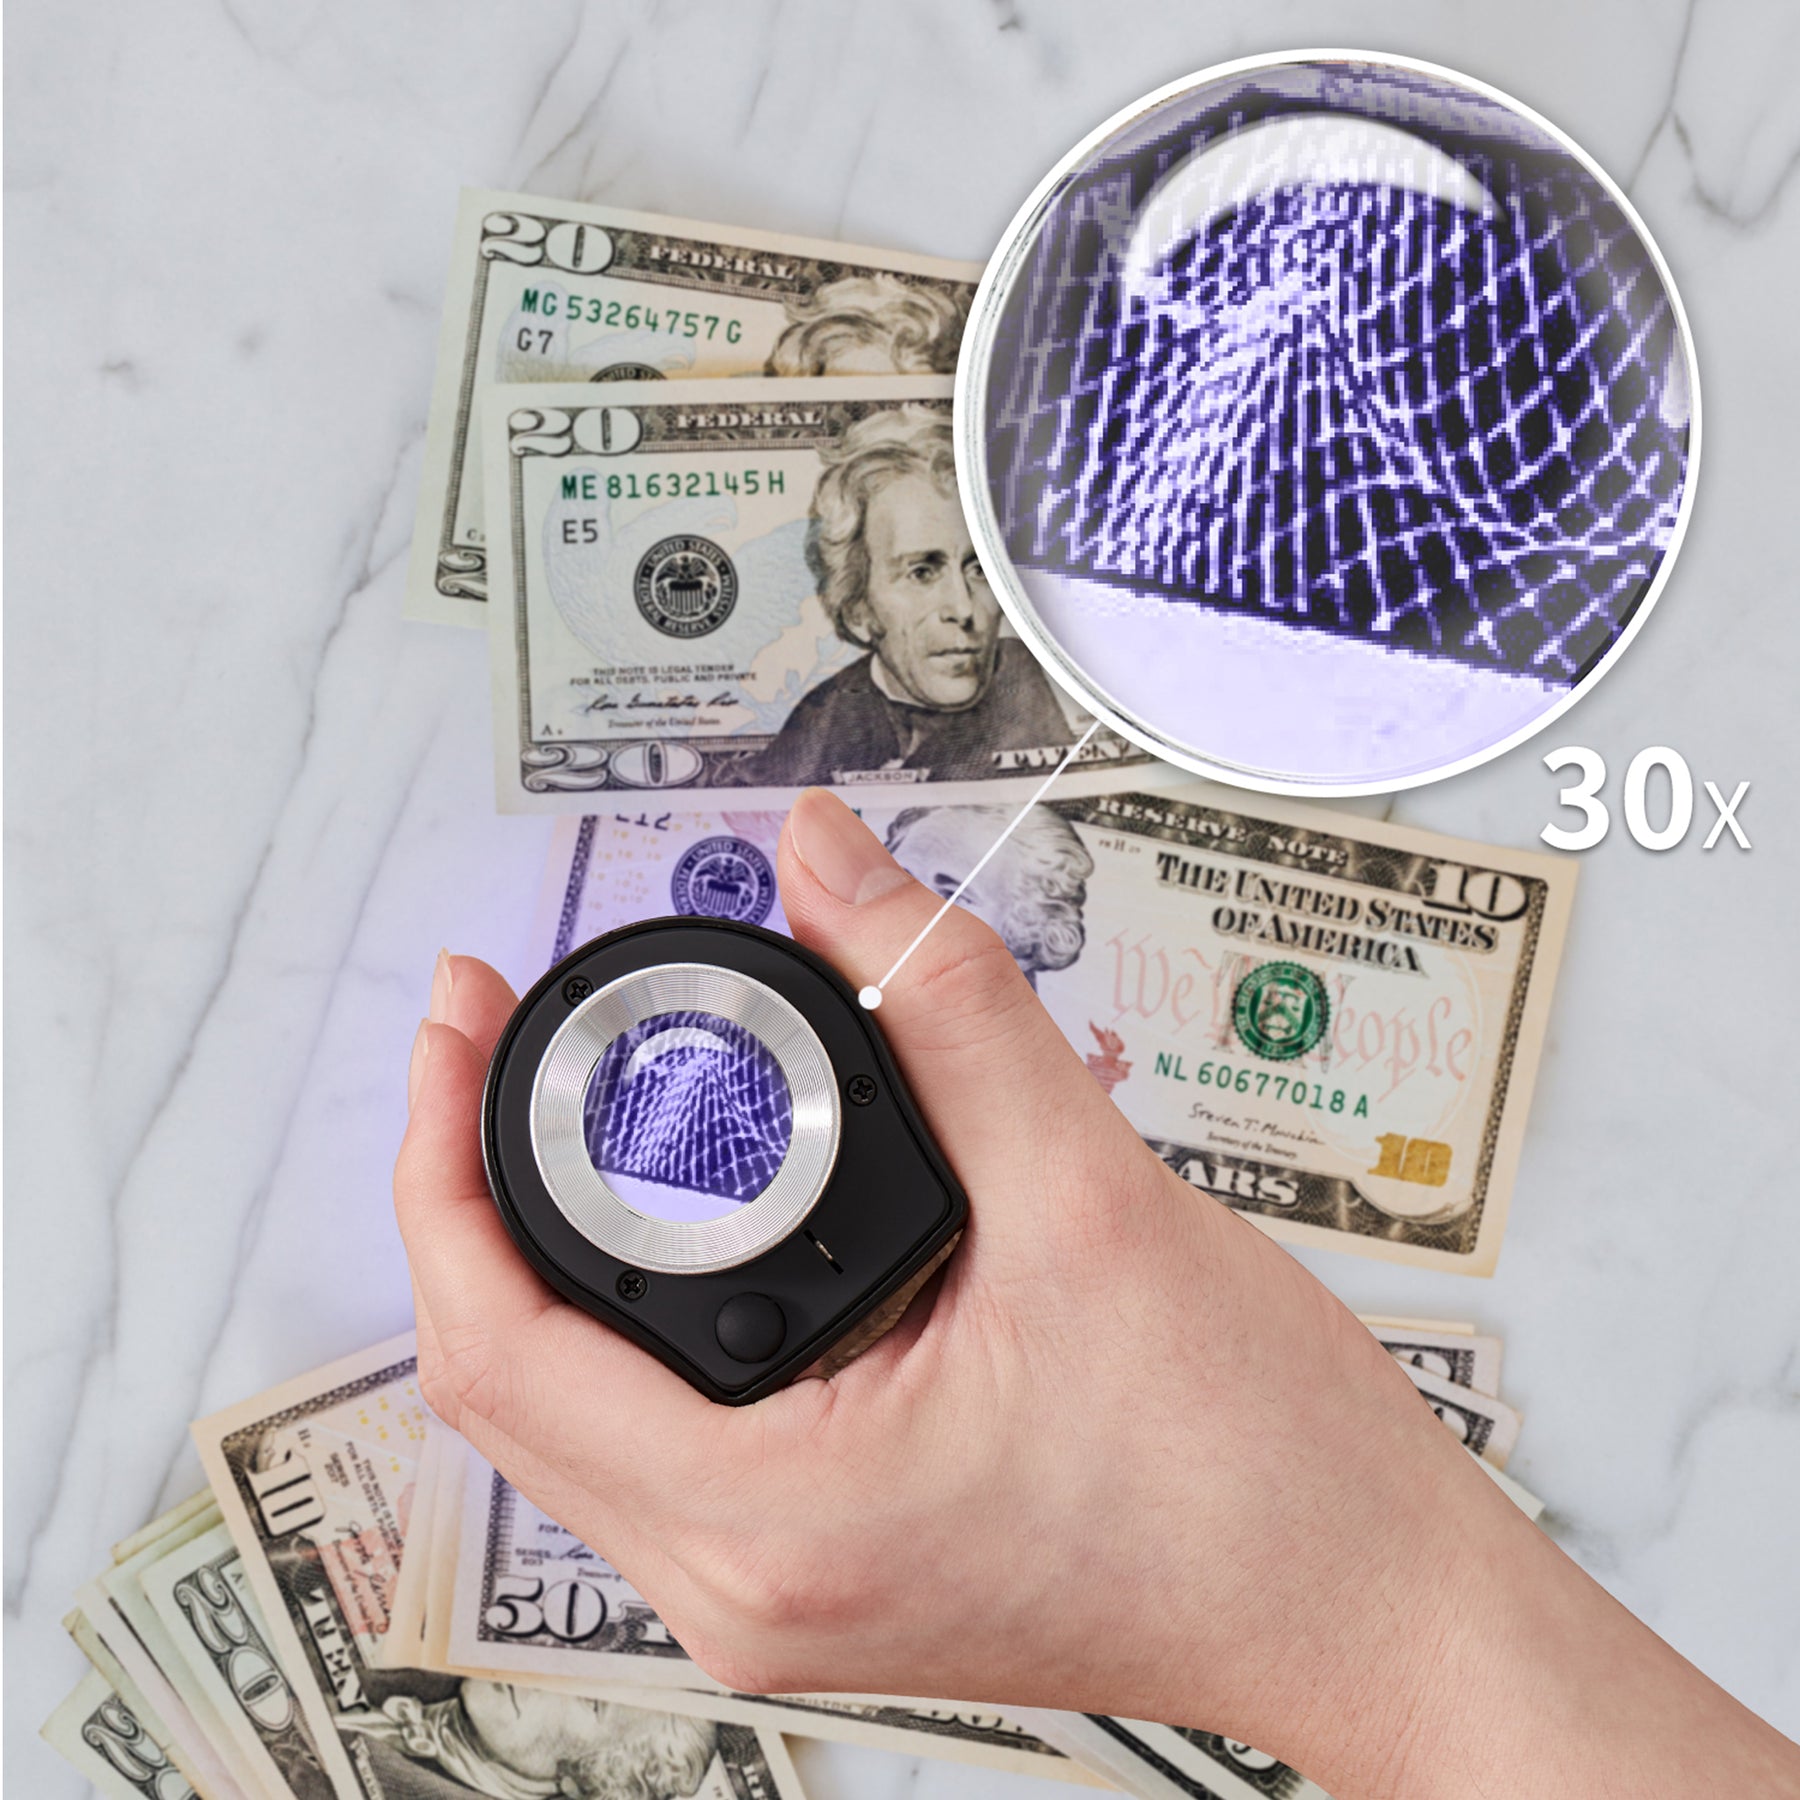 JARLINK 30X 60X Illuminated Jewelers Eye Loupe Magnifier Foldable Jewelry Magnifier with Bright LED Light for Gems Jewelry Coins Stamps Etc